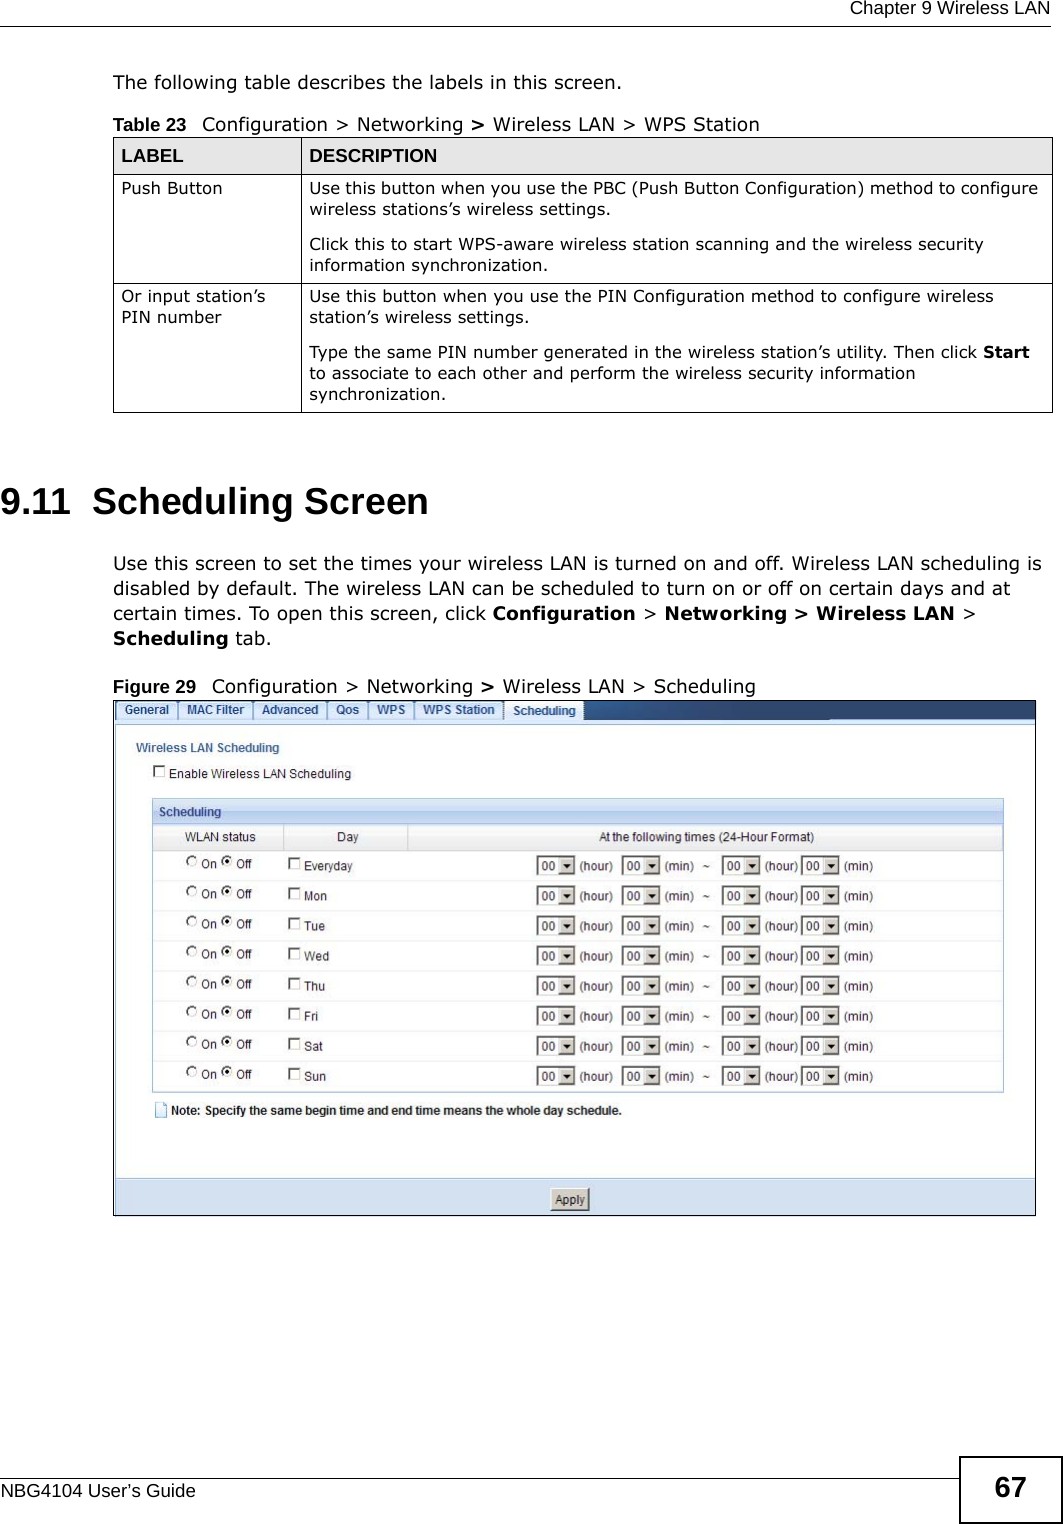  Chapter 9 Wireless LANNBG4104 User’s Guide 67The following table describes the labels in this screen.9.11  Scheduling ScreenUse this screen to set the times your wireless LAN is turned on and off. Wireless LAN scheduling is disabled by default. The wireless LAN can be scheduled to turn on or off on certain days and at certain times. To open this screen, click Configuration &gt; Networking &gt; Wireless LAN &gt; Scheduling tab.Figure 29   Configuration &gt; Networking &gt; Wireless LAN &gt; SchedulingTable 23   Configuration &gt; Networking &gt; Wireless LAN &gt; WPS StationLABEL DESCRIPTIONPush Button Use this button when you use the PBC (Push Button Configuration) method to configure wireless stations’s wireless settings. Click this to start WPS-aware wireless station scanning and the wireless security information synchronization. Or input station’s PIN numberUse this button when you use the PIN Configuration method to configure wireless station’s wireless settings. Type the same PIN number generated in the wireless station’s utility. Then click Start to associate to each other and perform the wireless security information synchronization. 